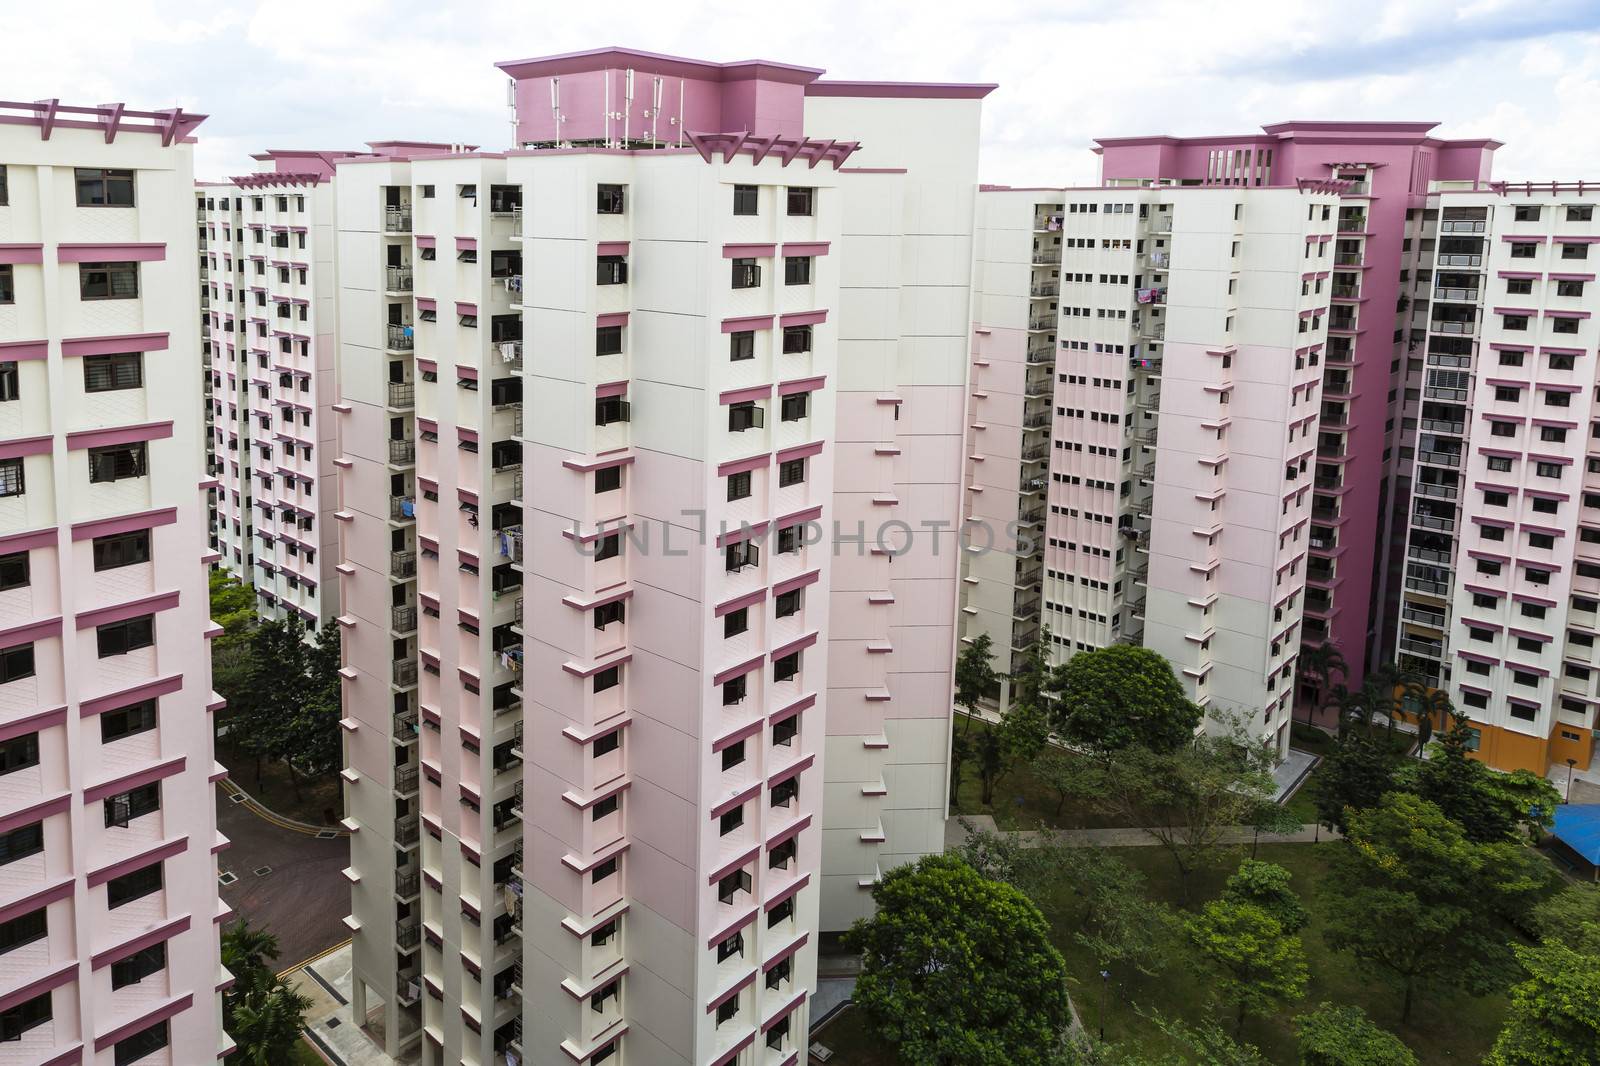 A high angle view of a residential estate with pink color theme- Singapore